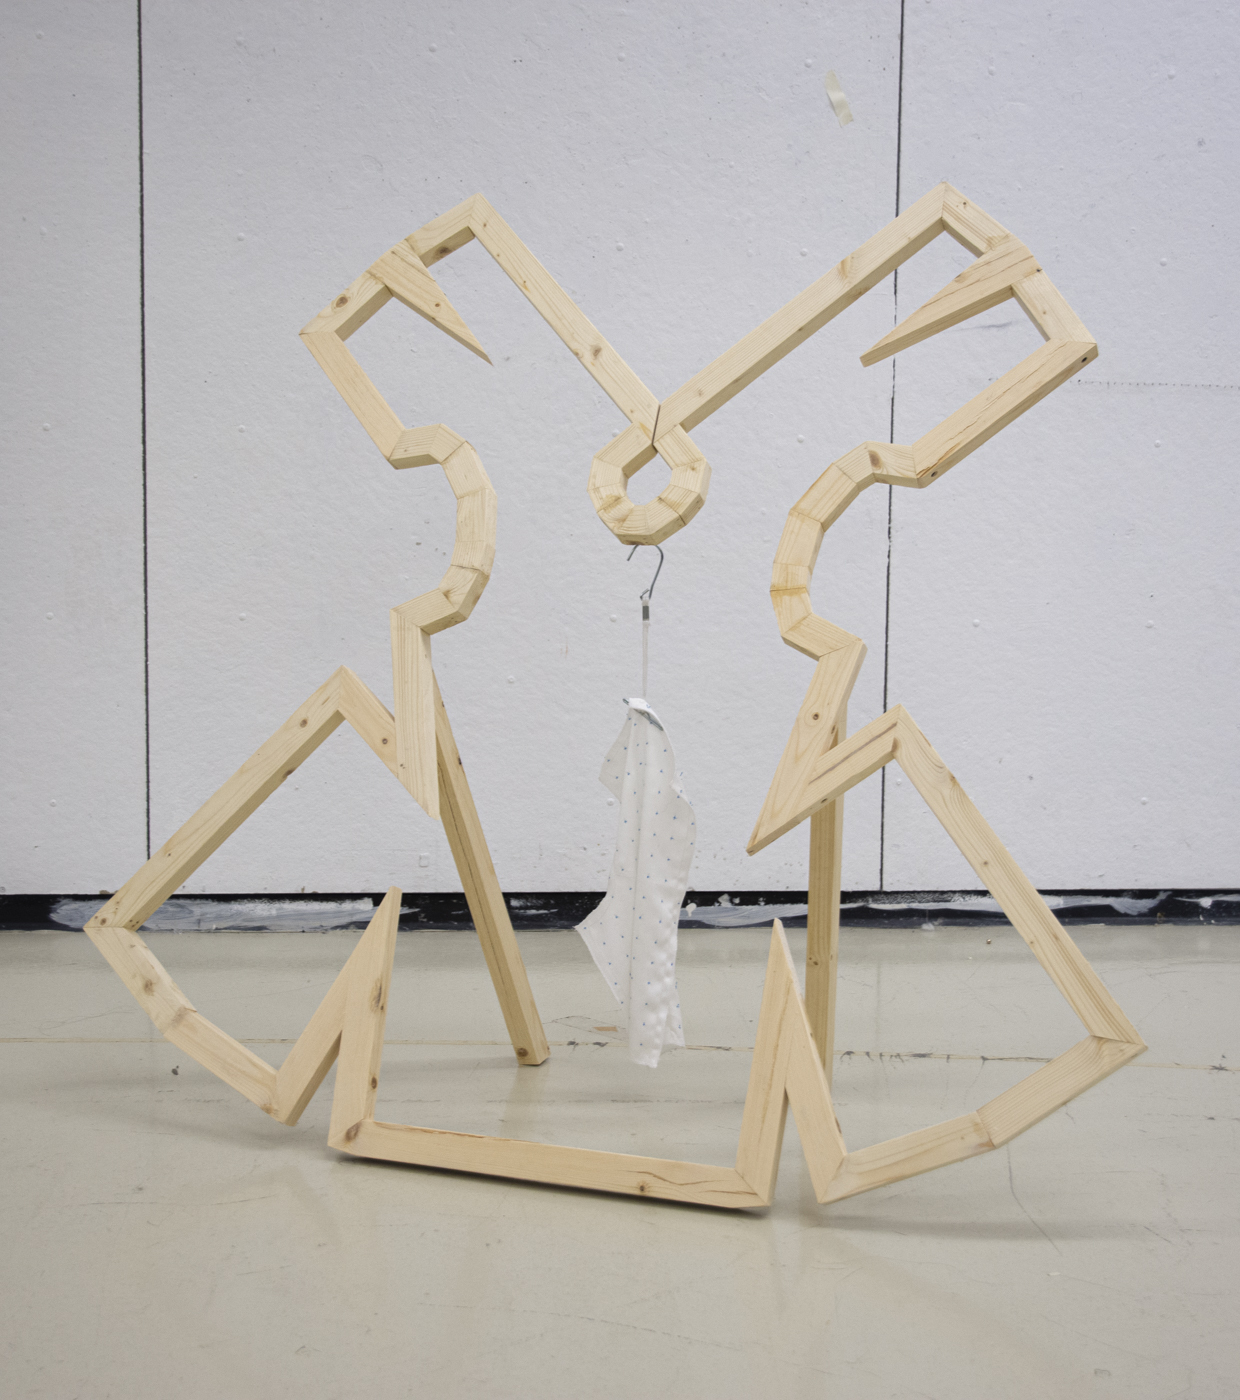 a wooden frame in an abstract shape leans back on two wooden legs. From the center of the shape, a pattern hook hangs. A white fabric hangs from the patternhook